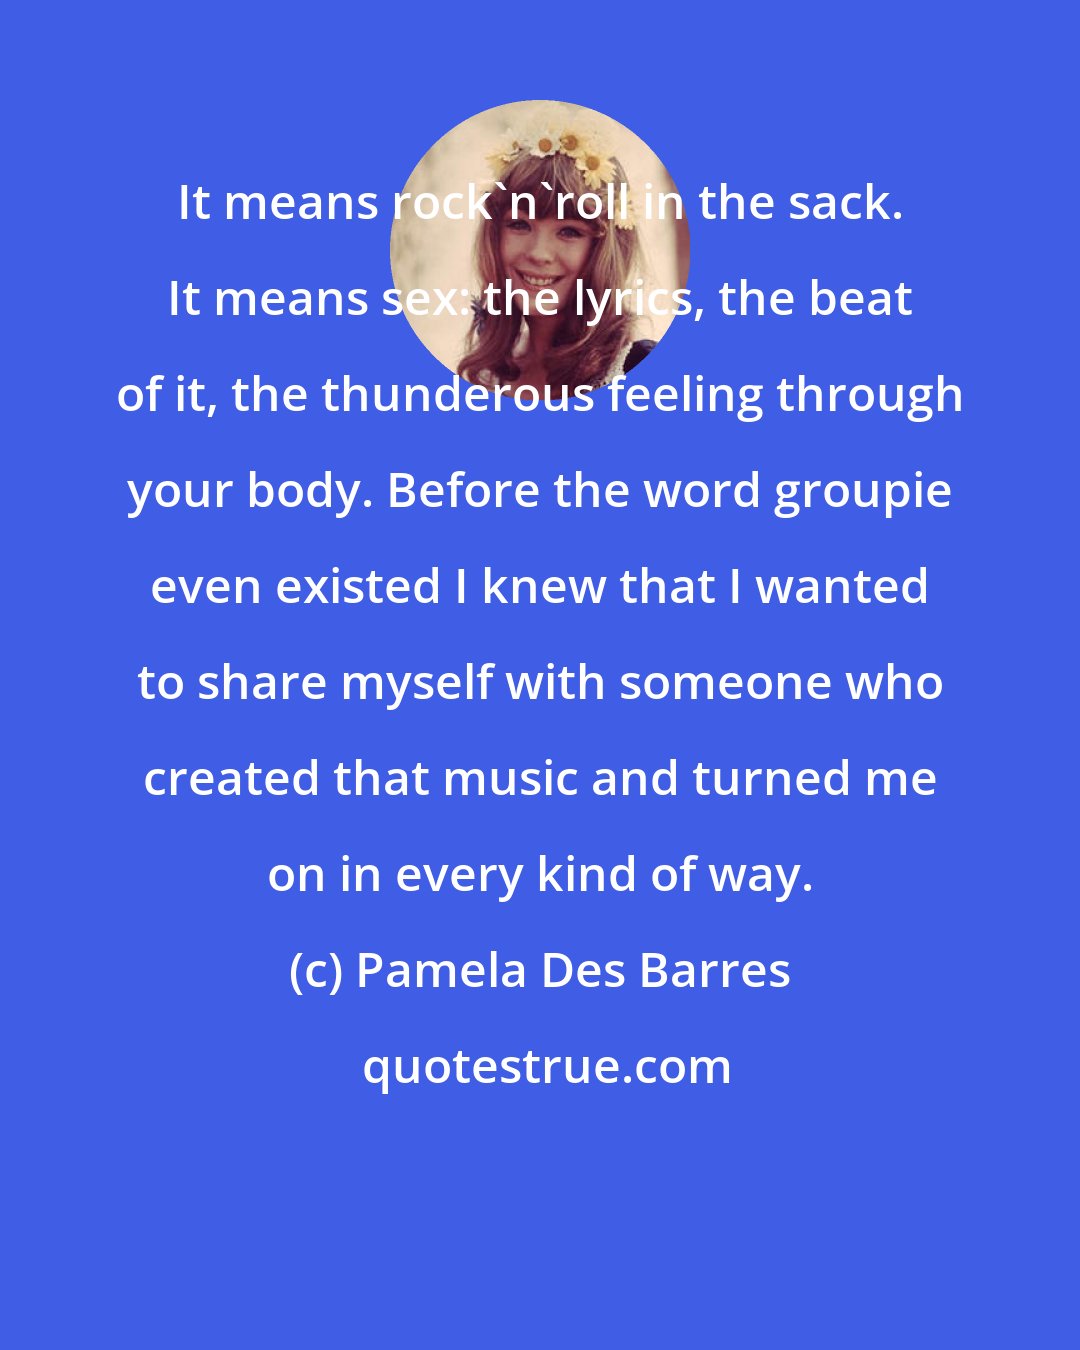 Pamela Des Barres: It means rock'n'roll in the sack. It means sex: the lyrics, the beat of it, the thunderous feeling through your body. Before the word groupie even existed I knew that I wanted to share myself with someone who created that music and turned me on in every kind of way.